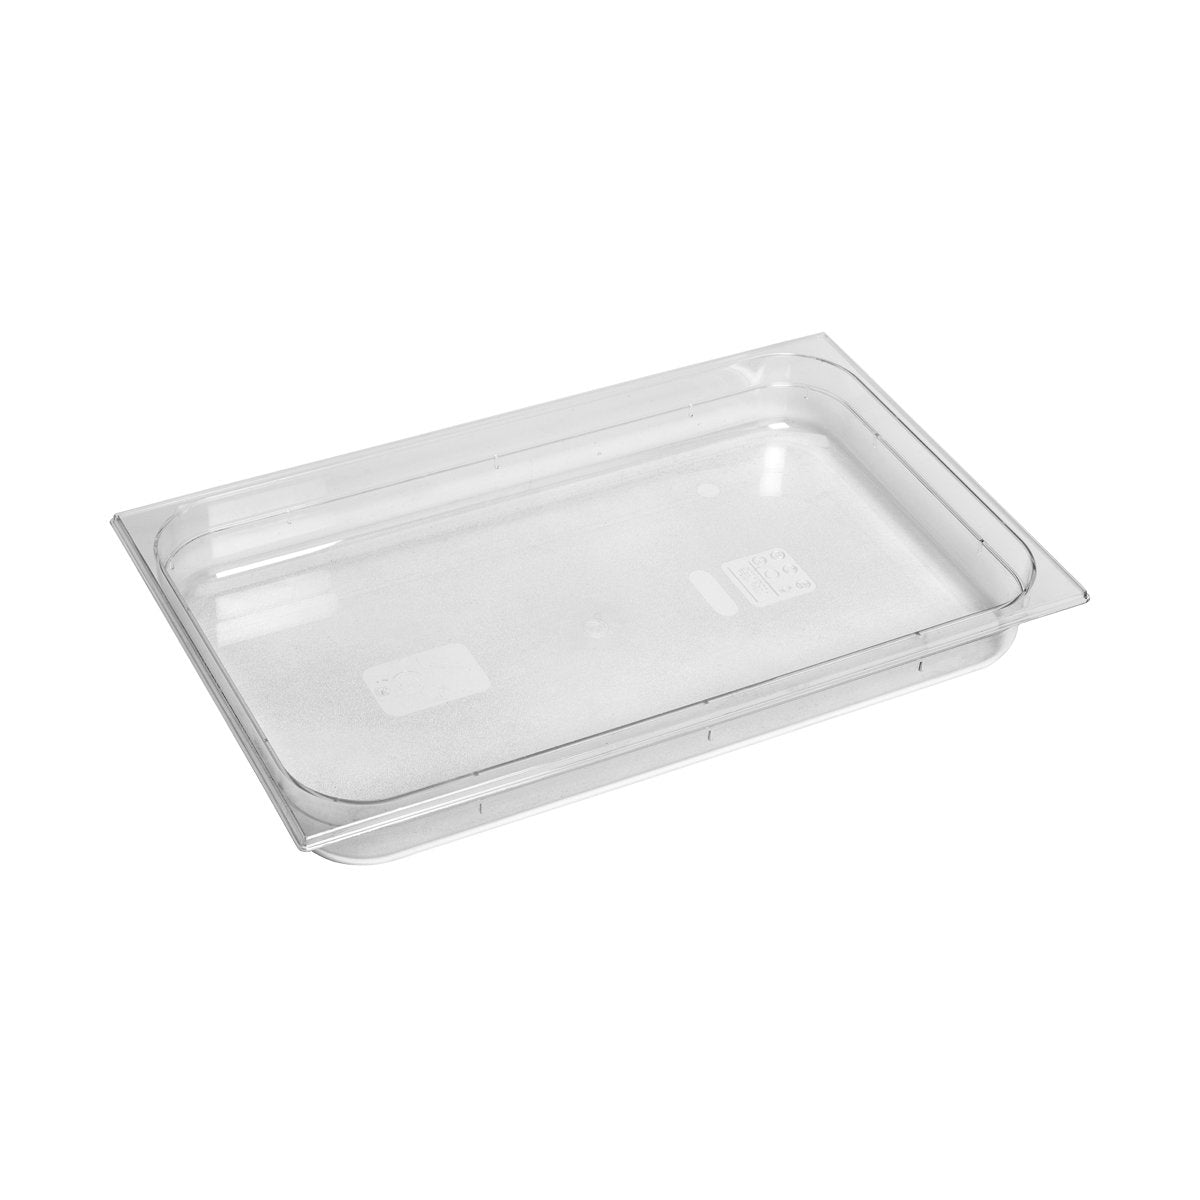 PC-11065CL Inox Macel Gastronorm Pan Polycarbonate Clear 1/1 Size 65mm Tomkin Australia Hospitality Supplies